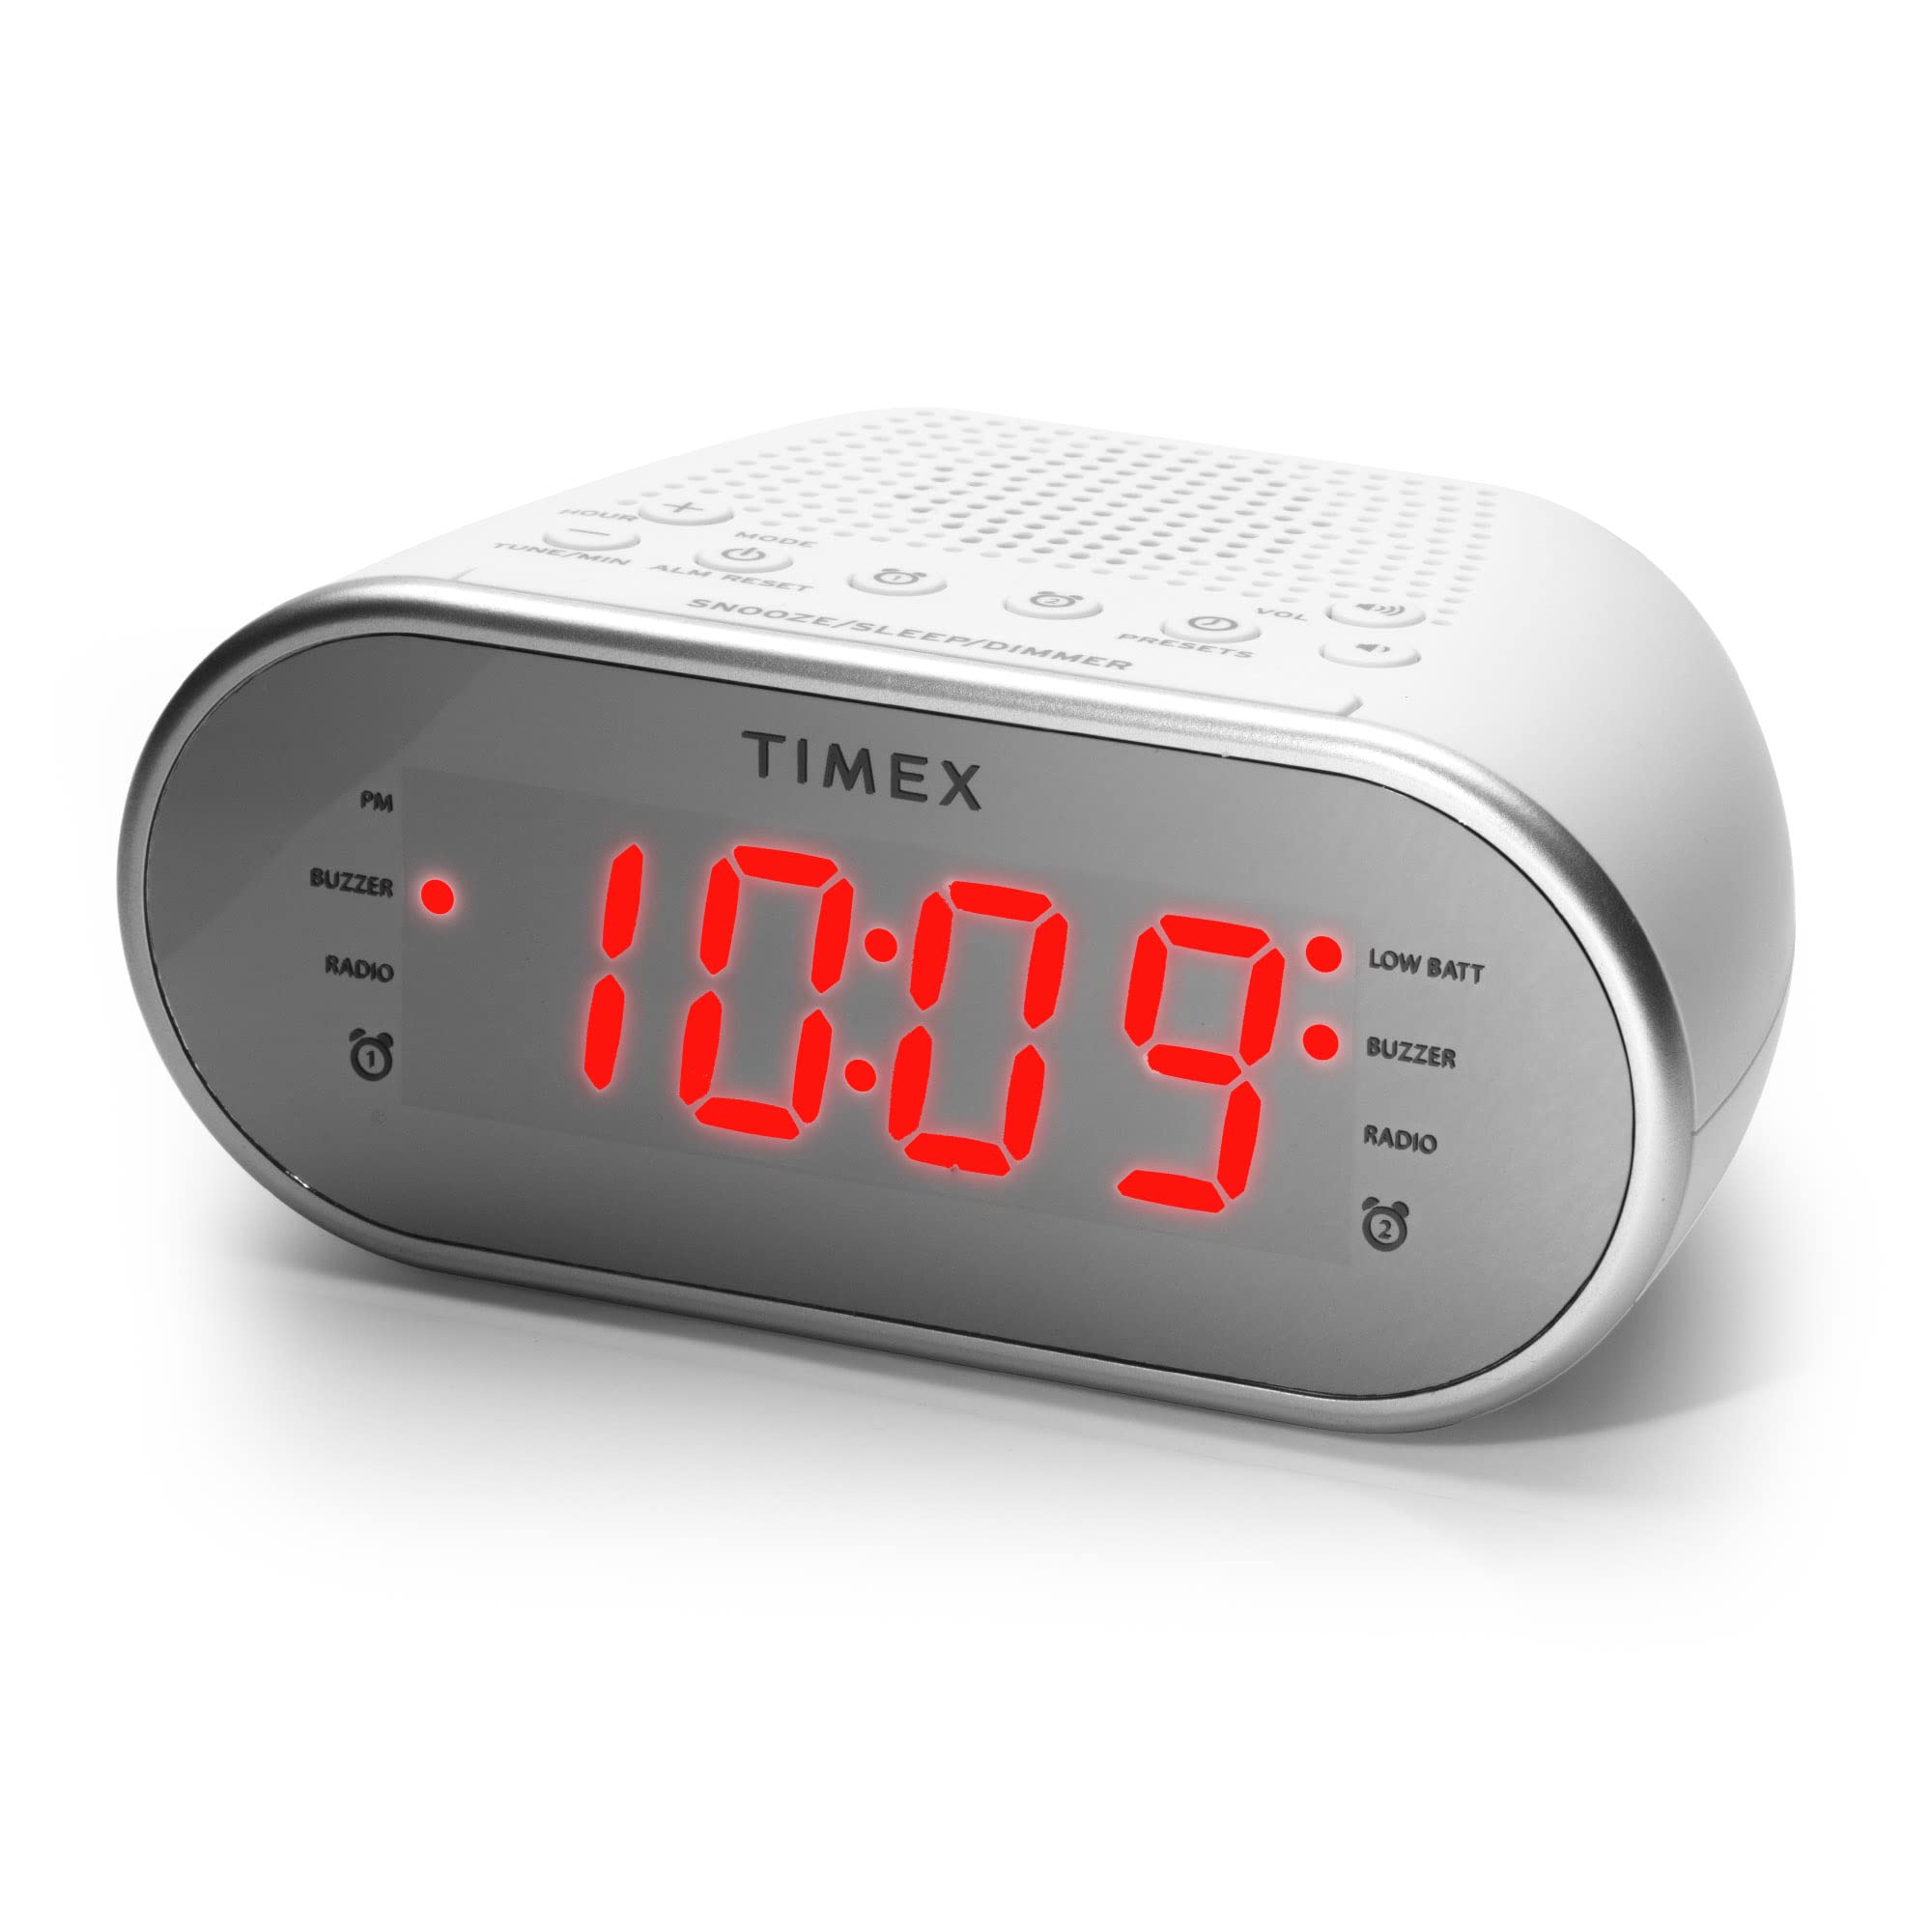 Timex Alarm Clock With AM/FM Radio And 20 Station Presets, Digital Clock Radio With Dual Alarms, Programmable Timer, Snooze, Aux Speaker, And Adjustable Volume Switch (T2312W), White